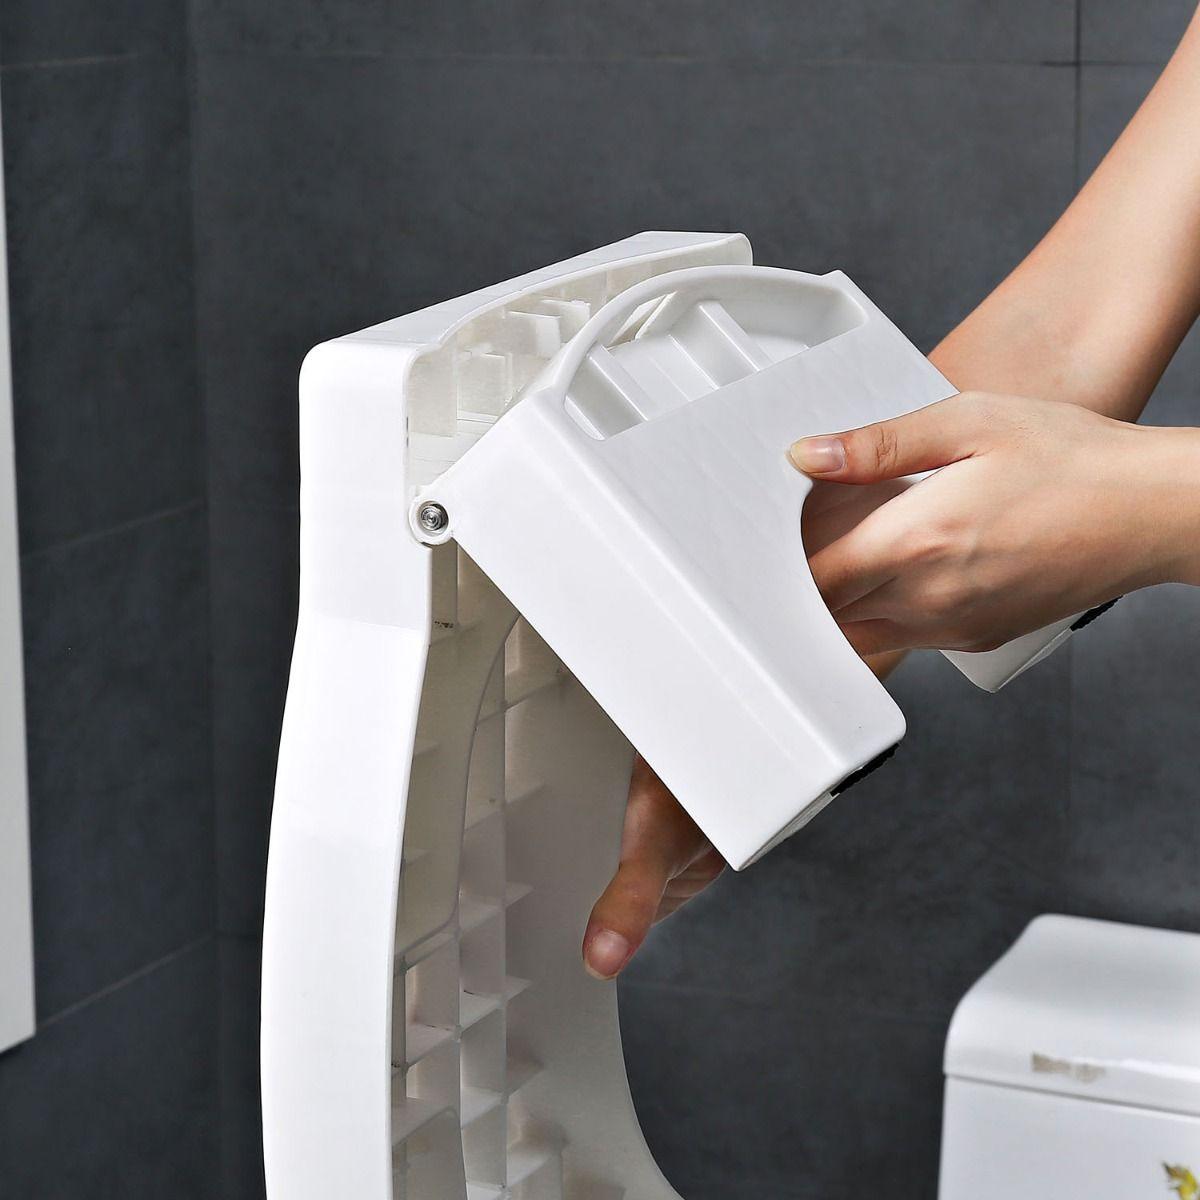 White Folding Toilet Stool Step Bathroom Aid Adult Children - Home Inspired Gifts